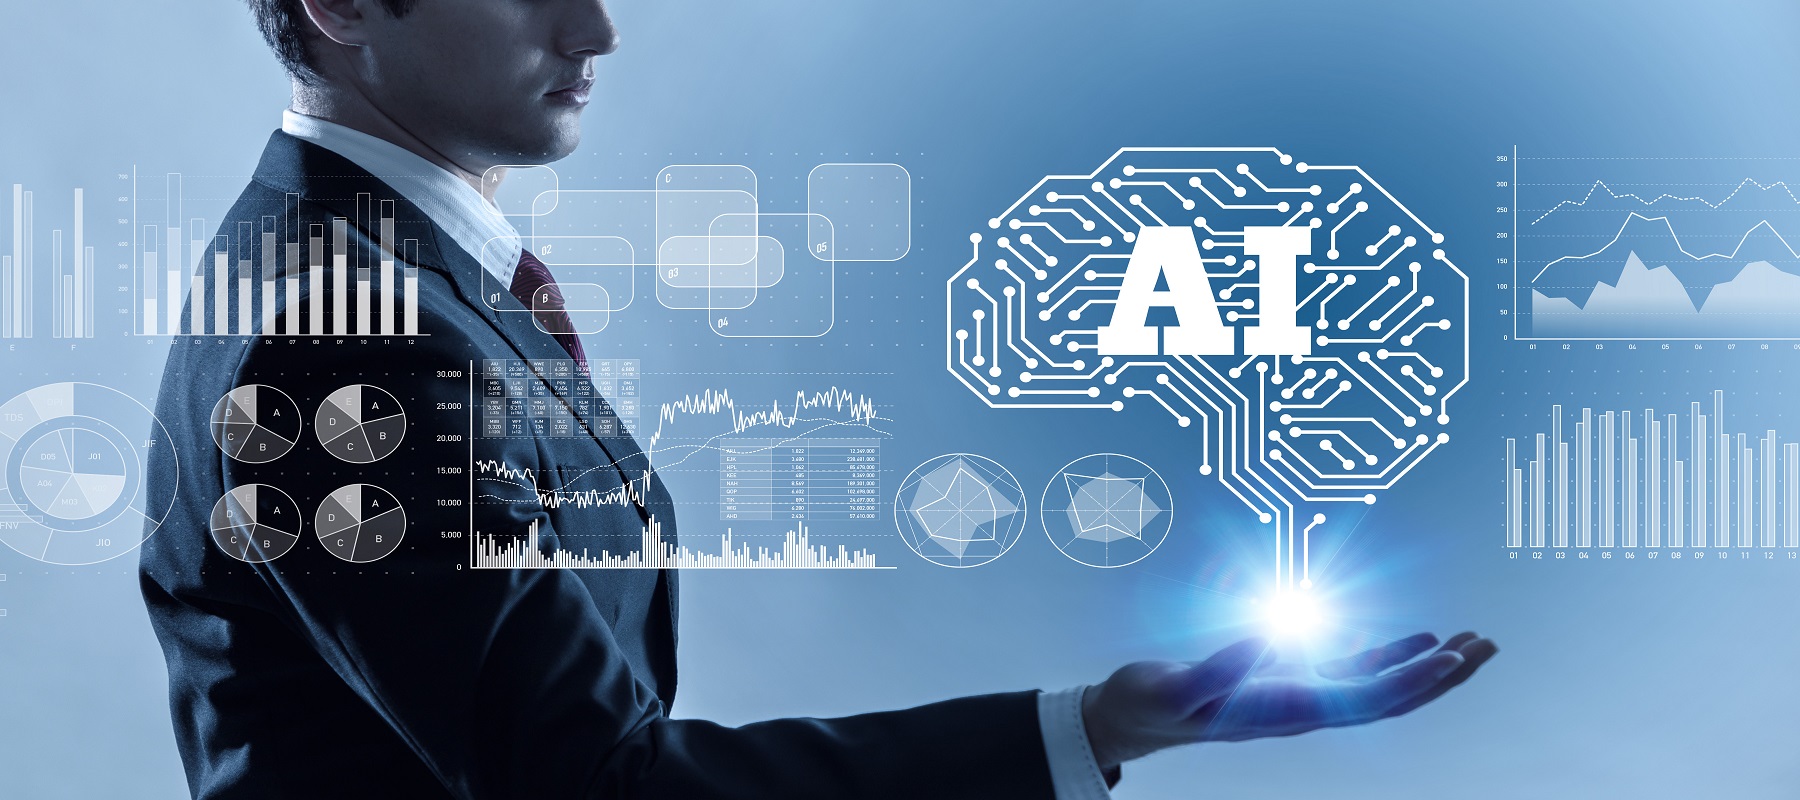 AI will create more jobs than it replaces, report